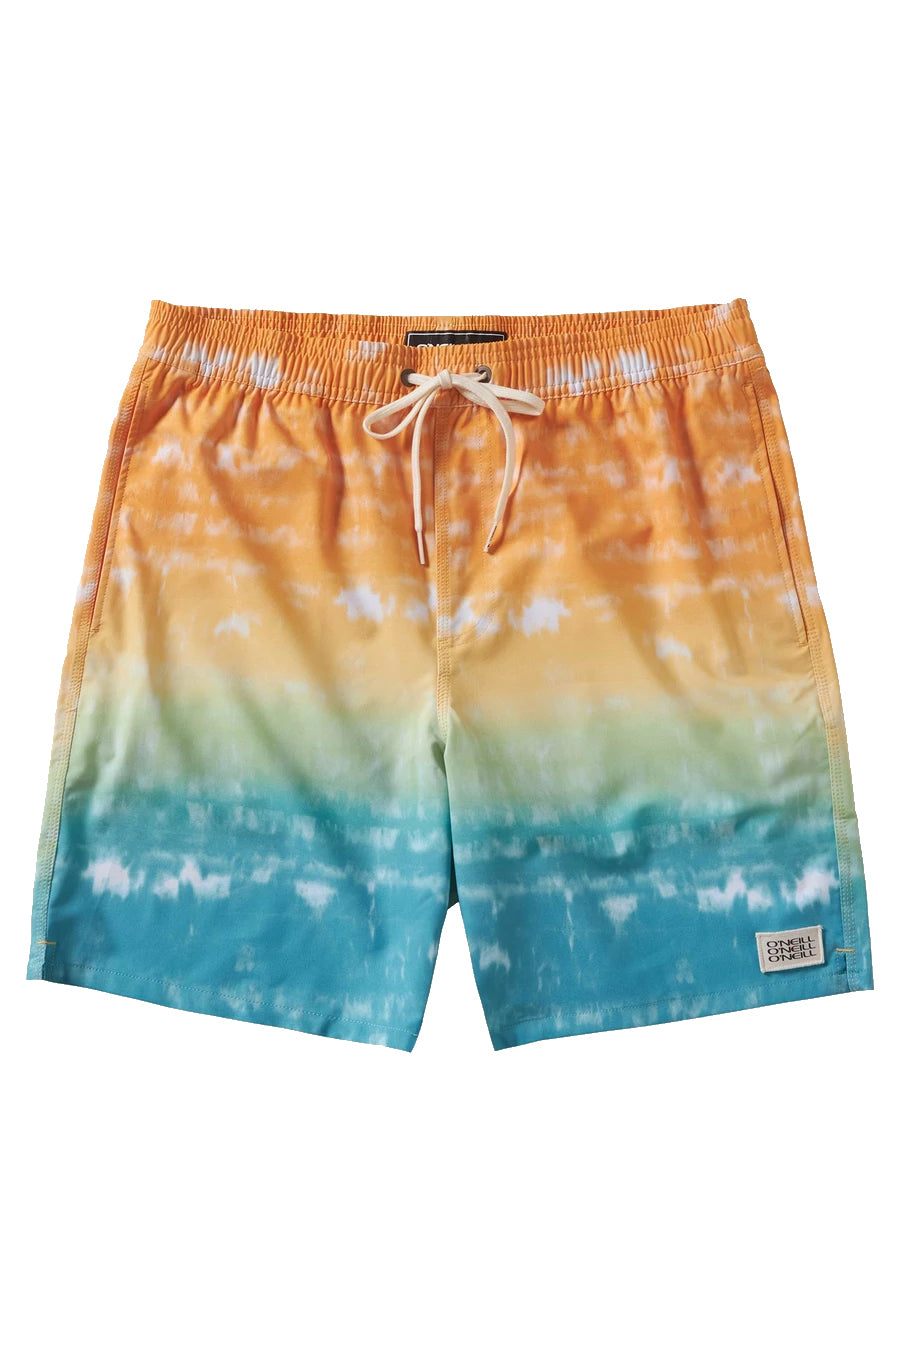 O'neill Mixed Up 17" Volley Boardshorts MUL-Multi XL